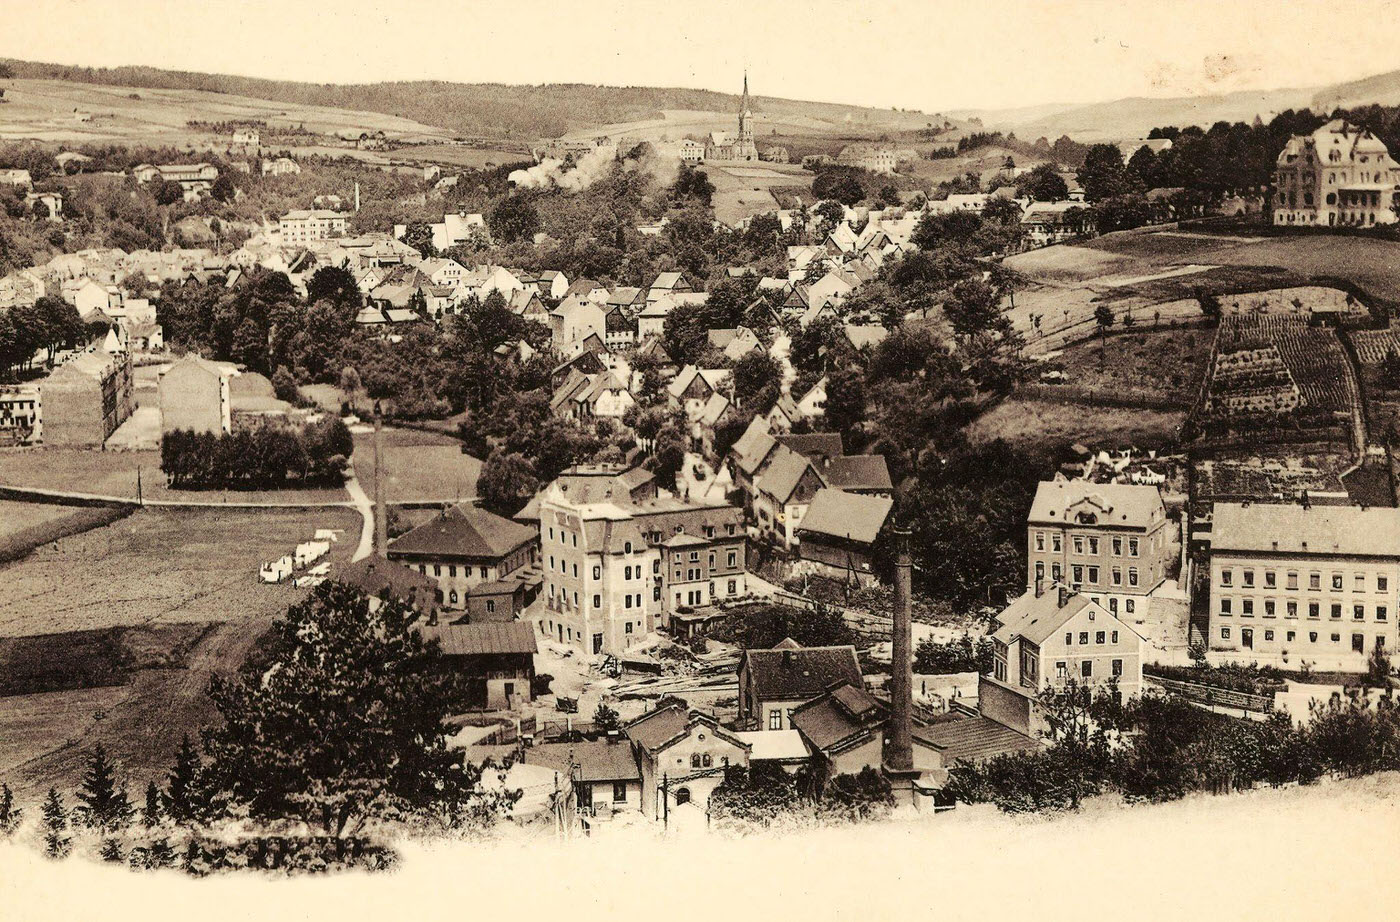 Churches and Buildings in Sebnitz, Germany, 1903.